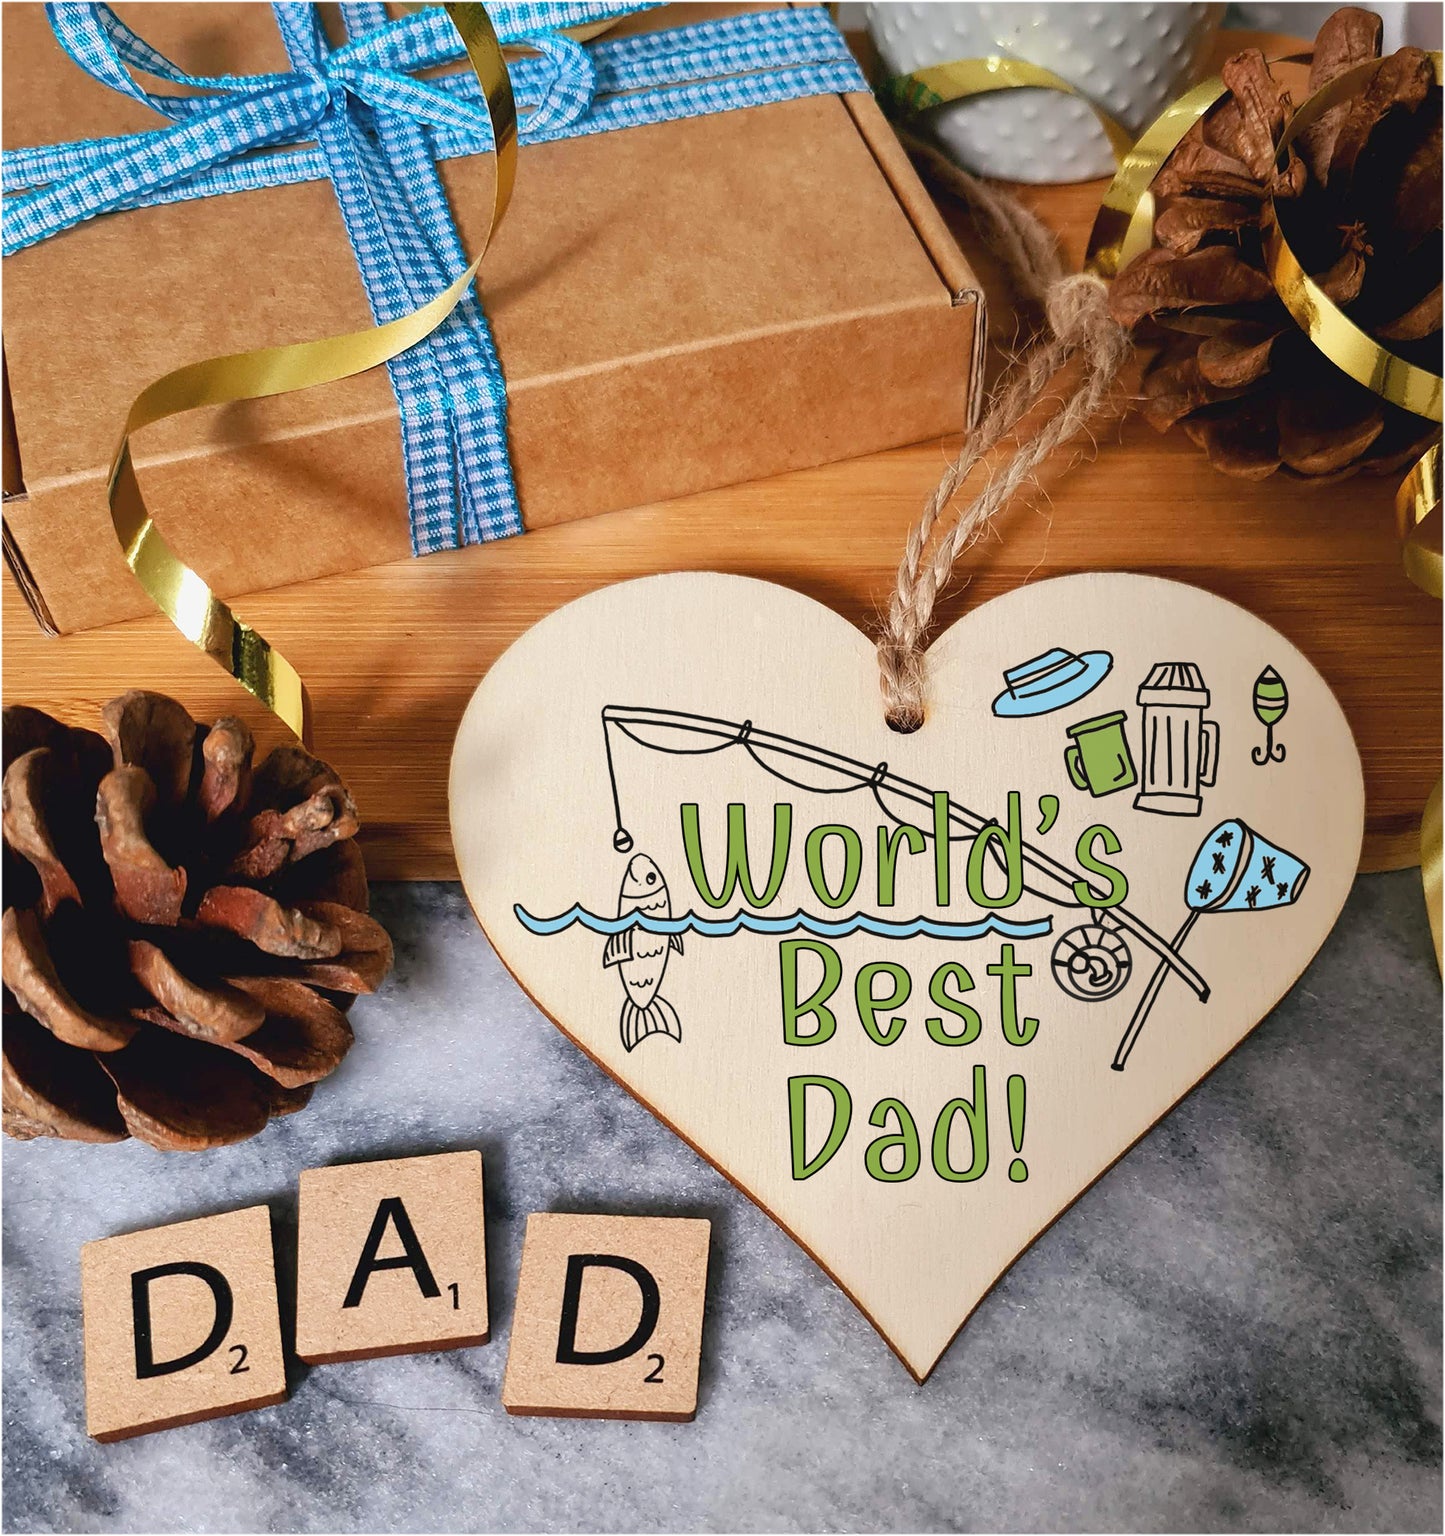 Handmade Wooden Hanging Heart Plaque Gift for Dad this Fathers Day Novelty Fun Thoughtful Keepsake for Fishing Fan